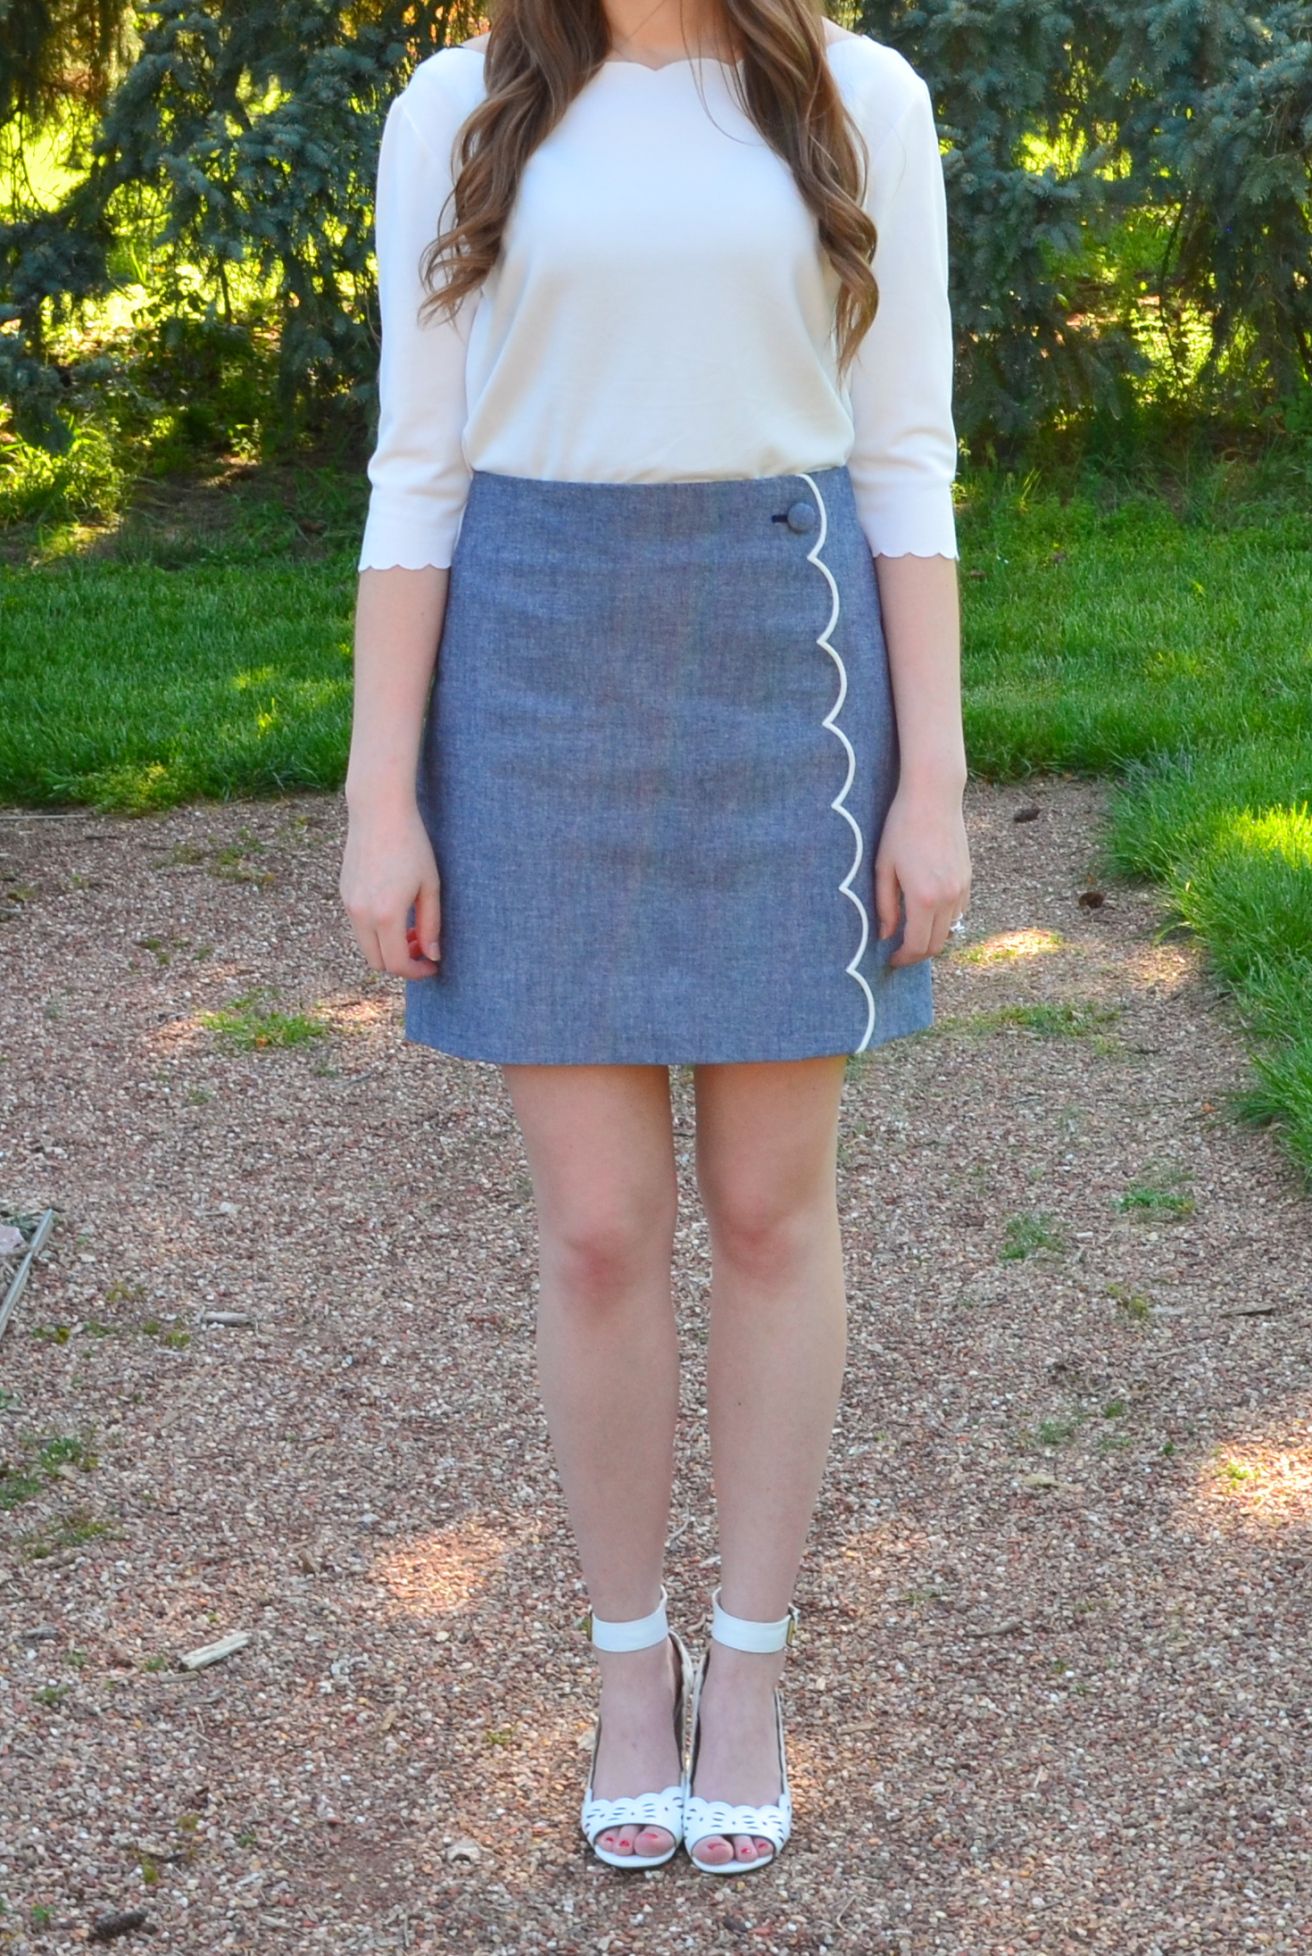 Scallop Skirt Outfits